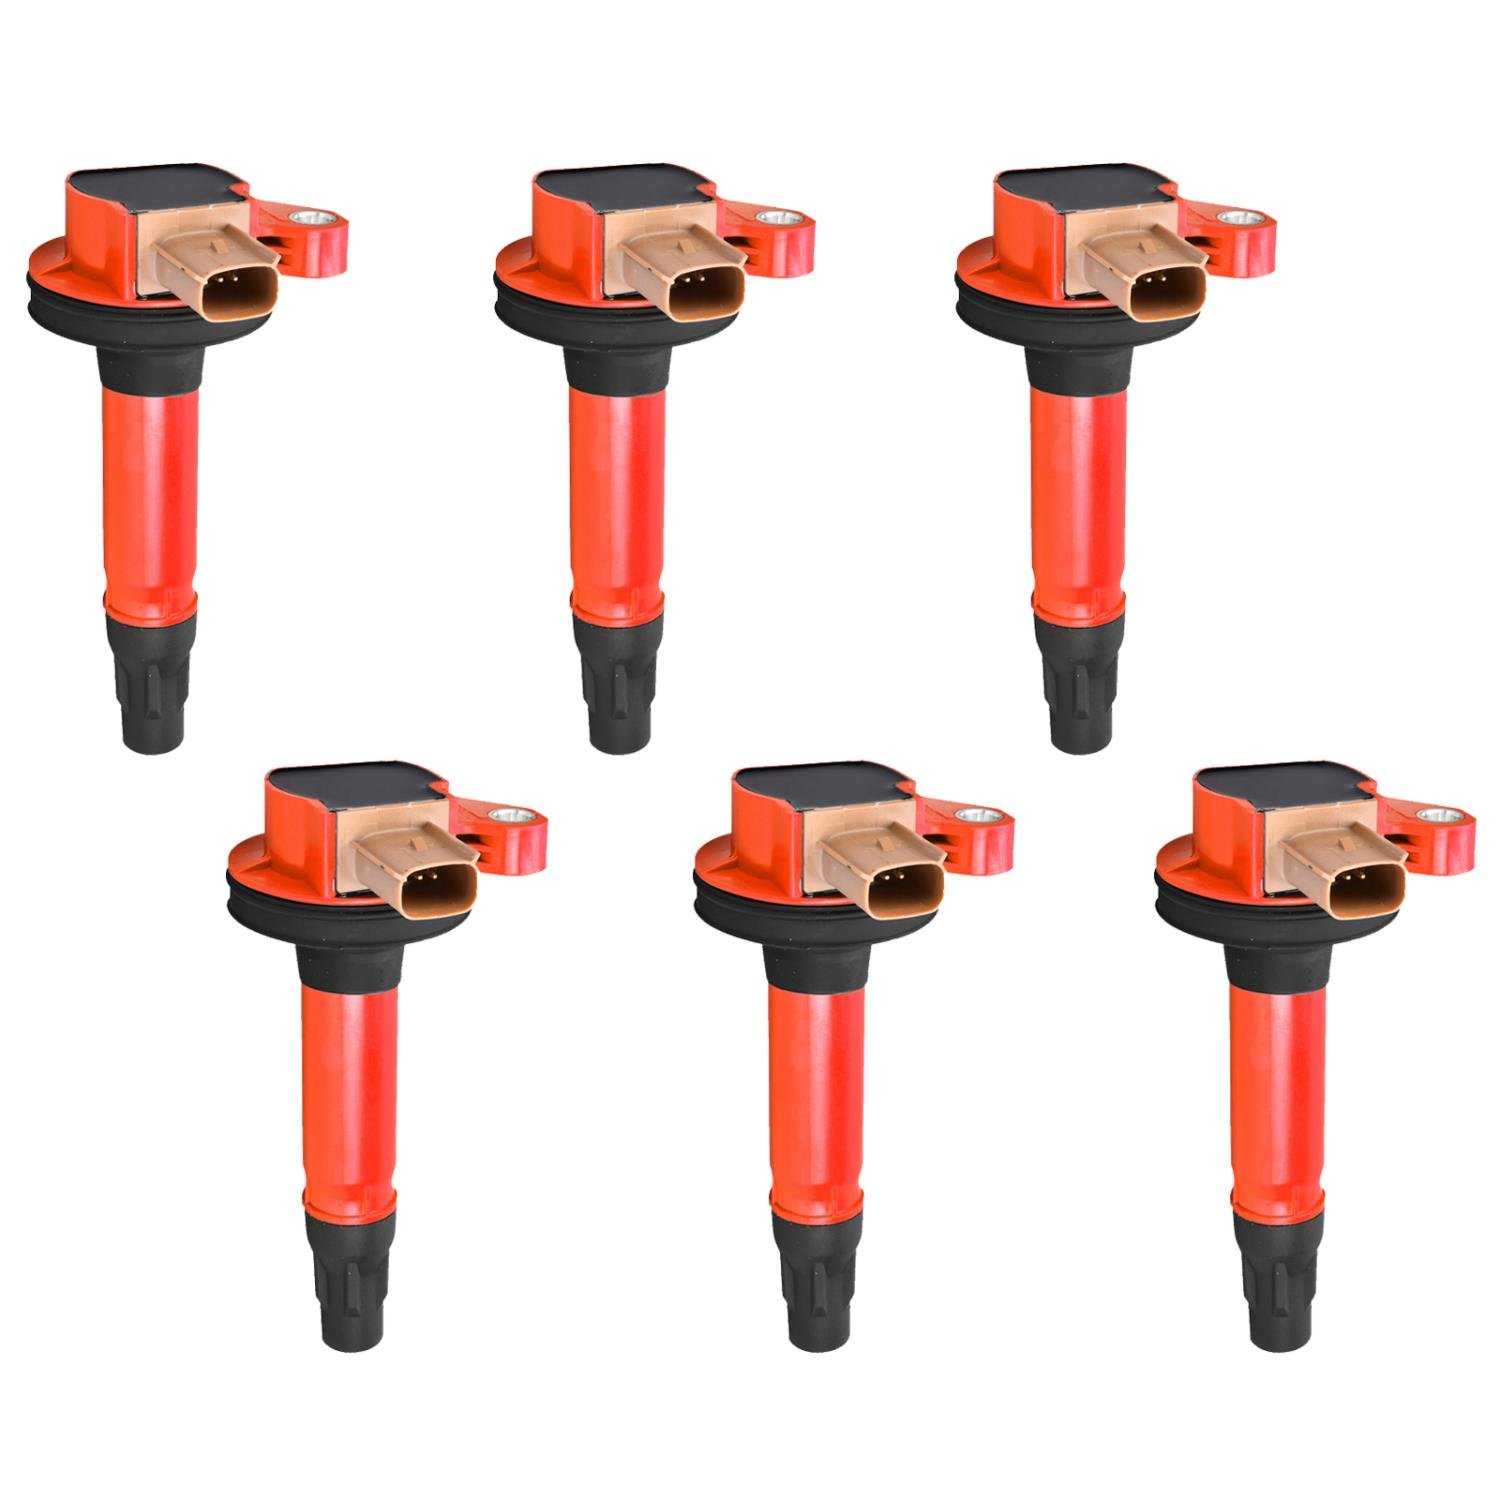 High-Performance Ignition Coils for Ford F-150/Explorer Ecoboost 3.5L [Red]